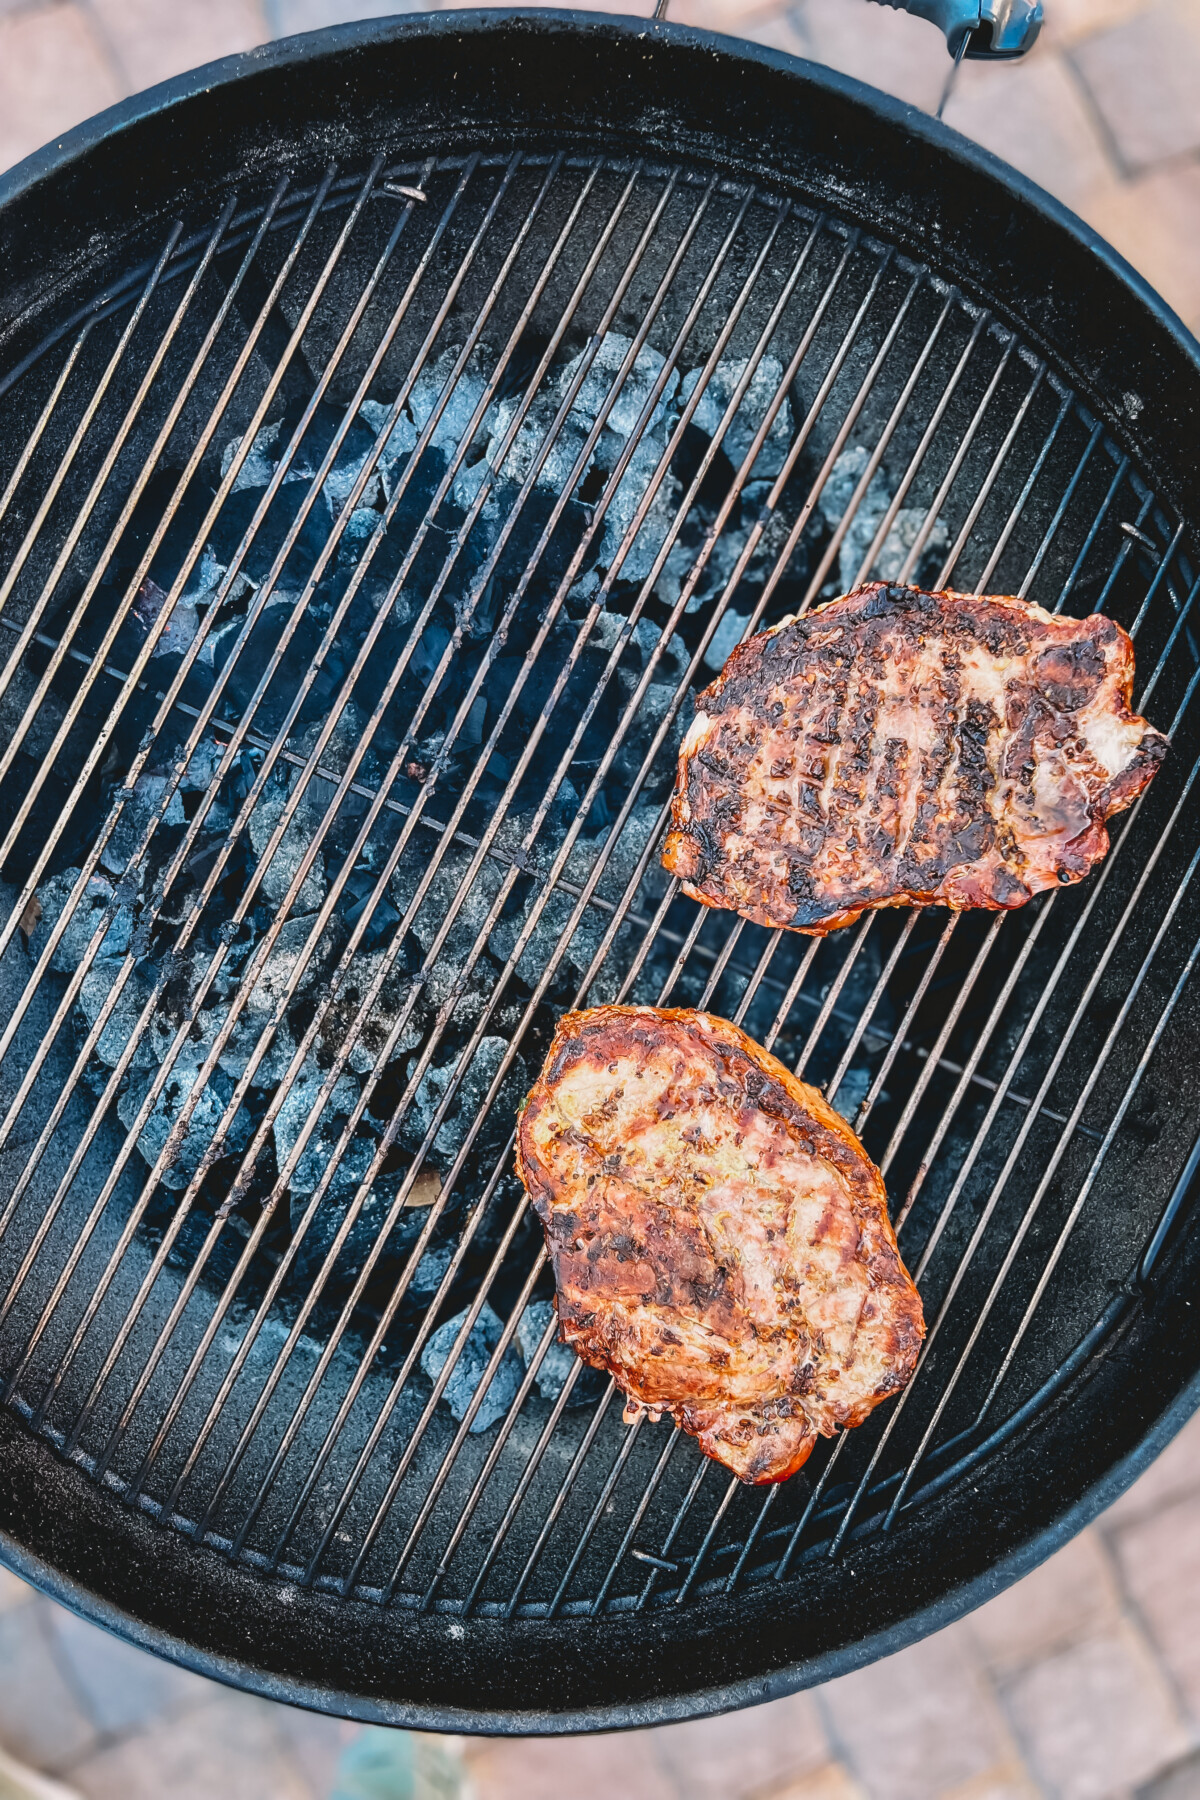 2 pork chops with grill marks and a little char over charcoal grill